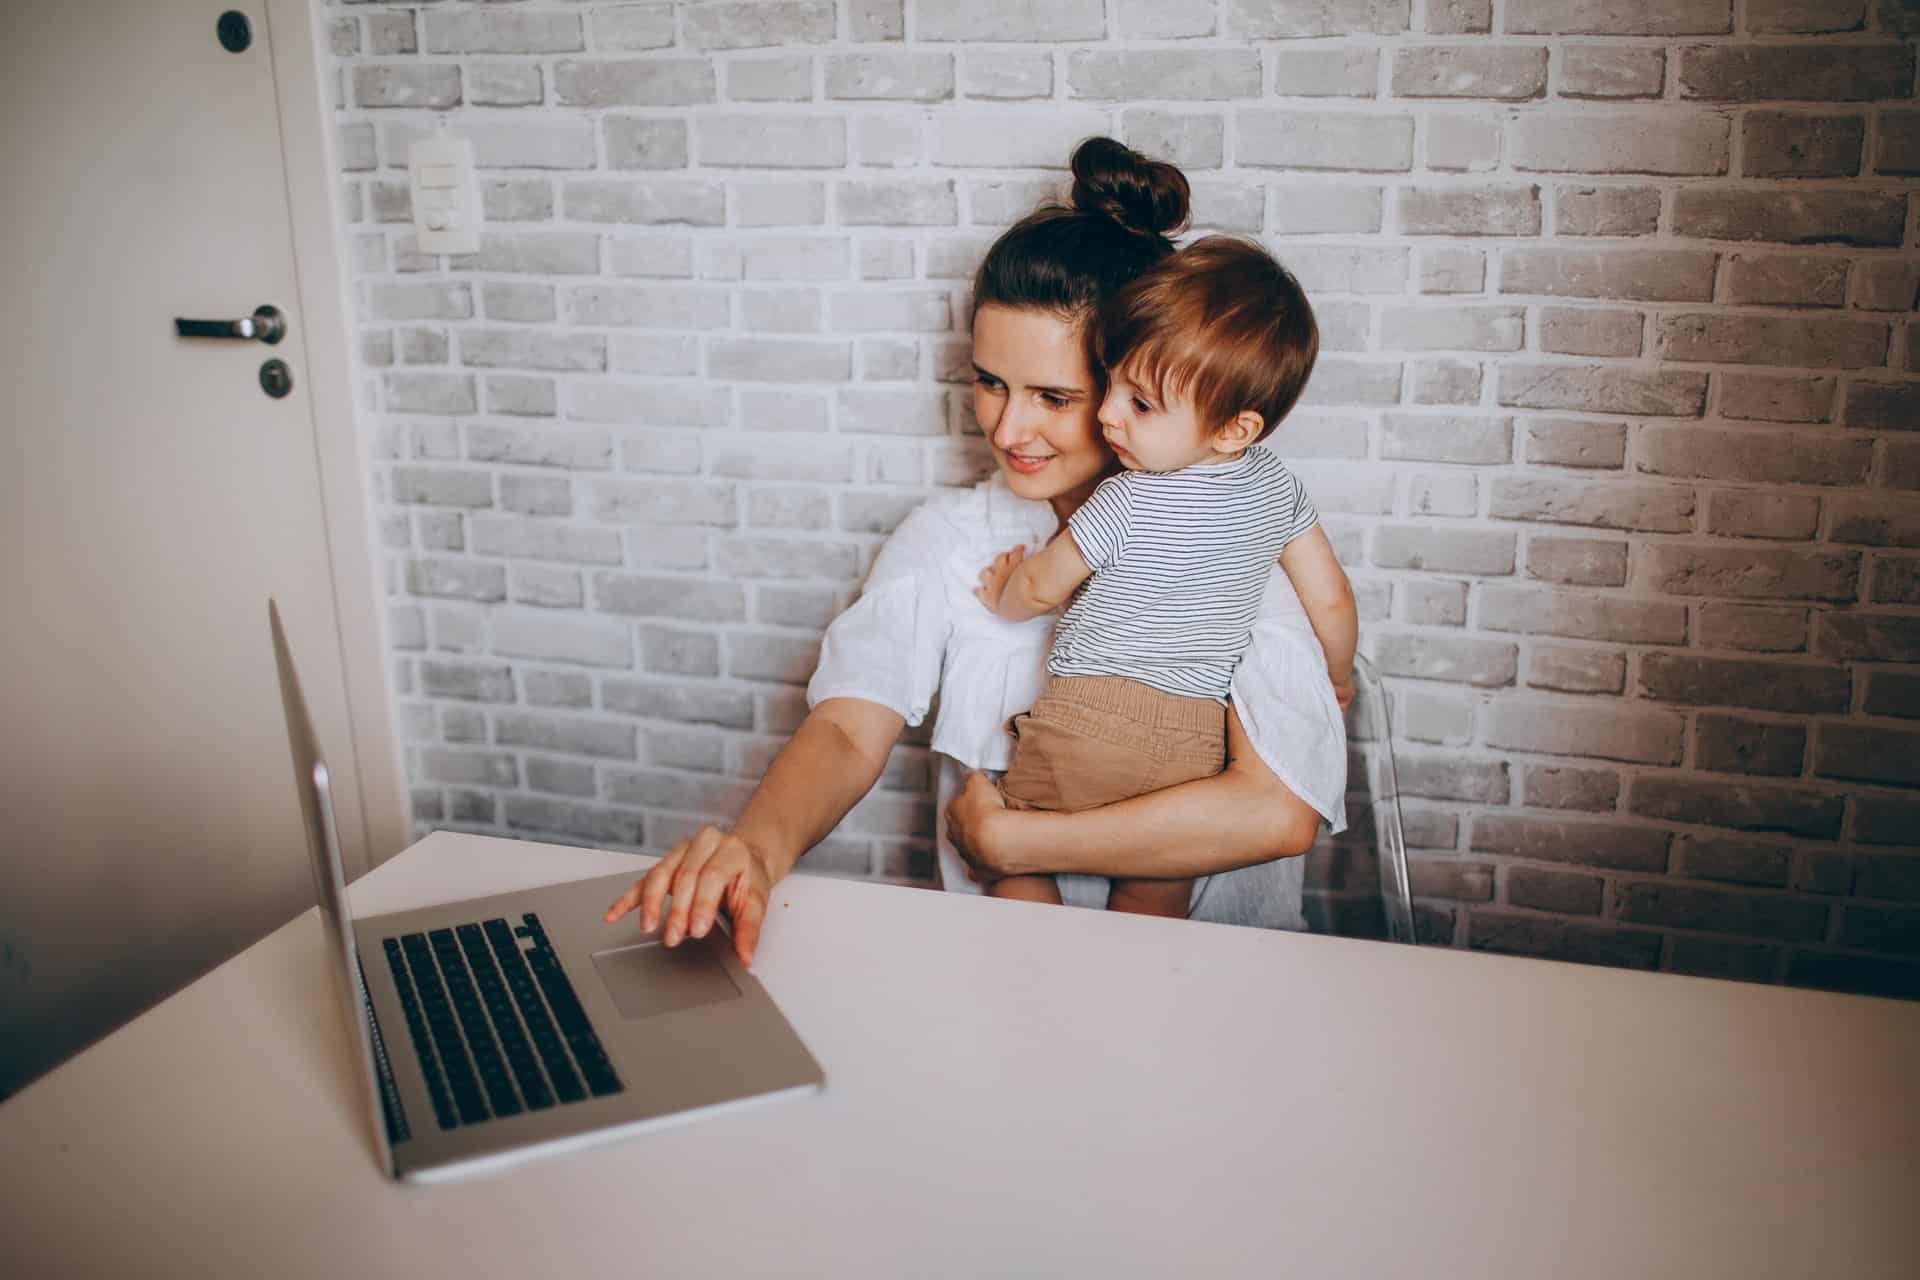 How to prepare to return to work after maternity leave?